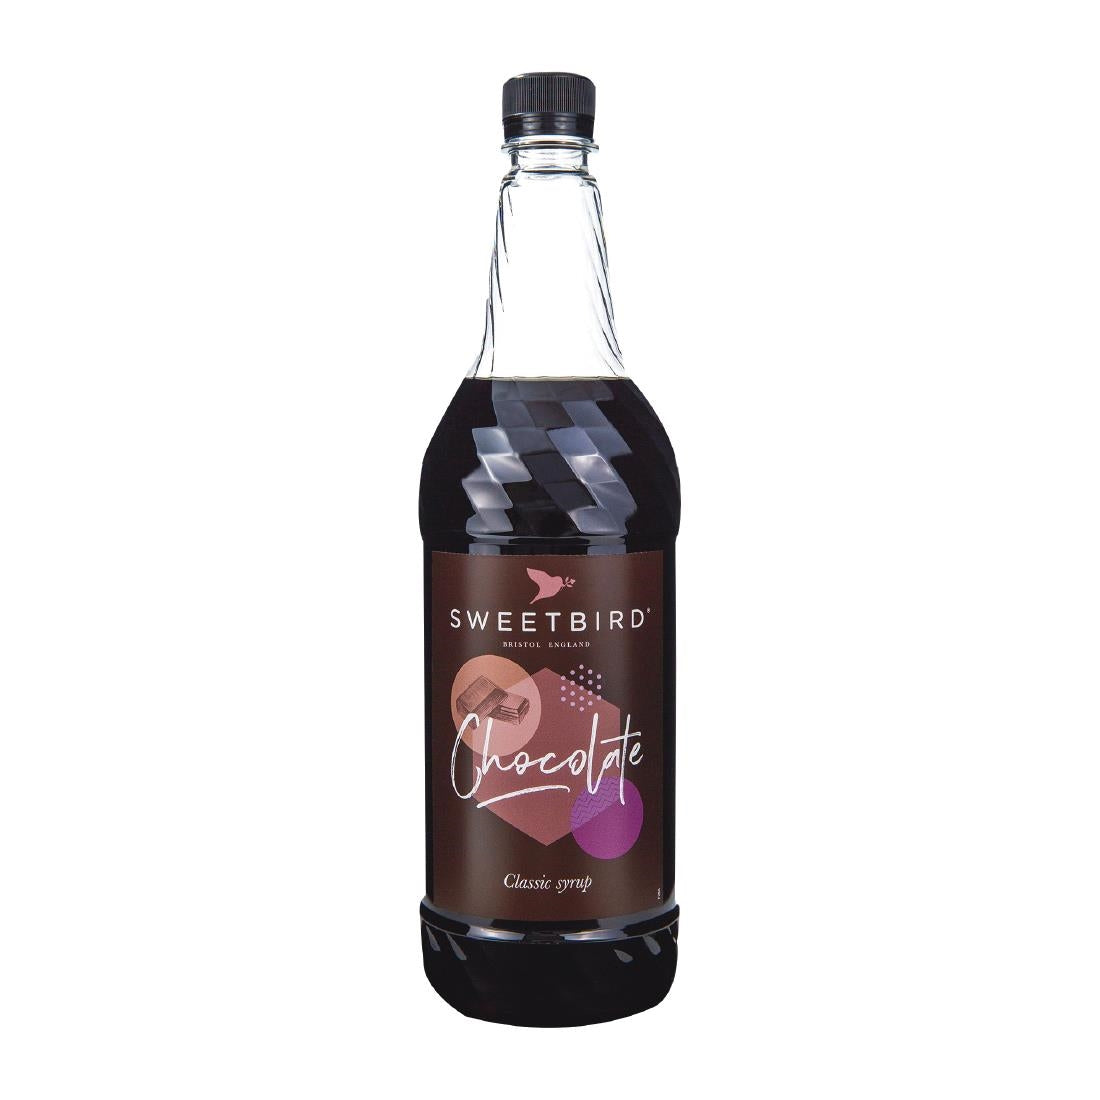 Sweetbird Chocolate Syrup 1 Litre